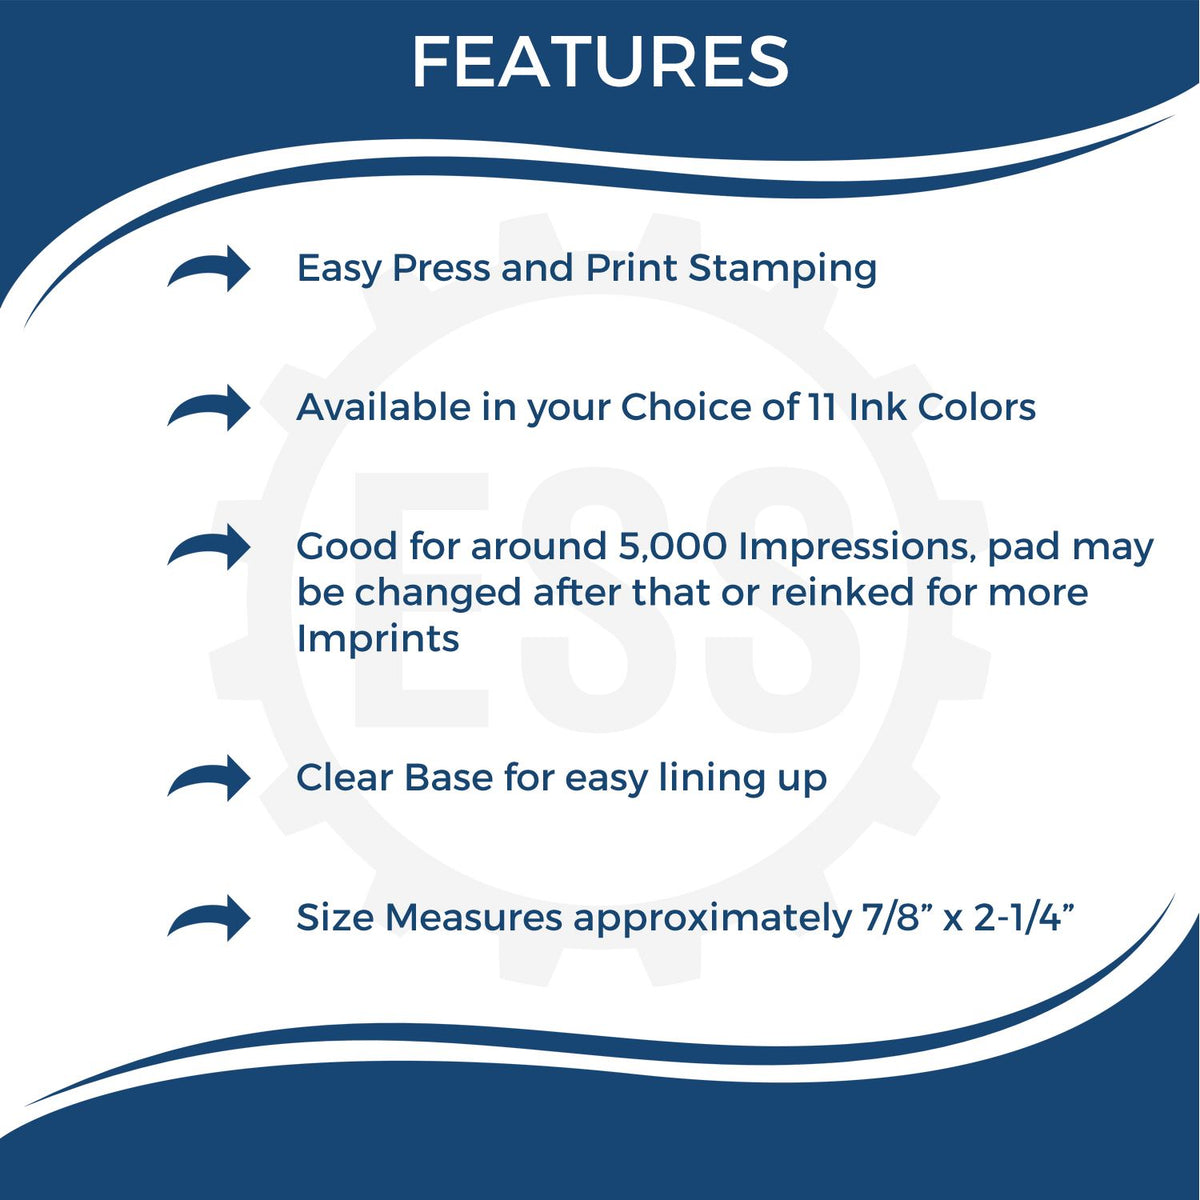 Large Self Inking Distributed Stamp